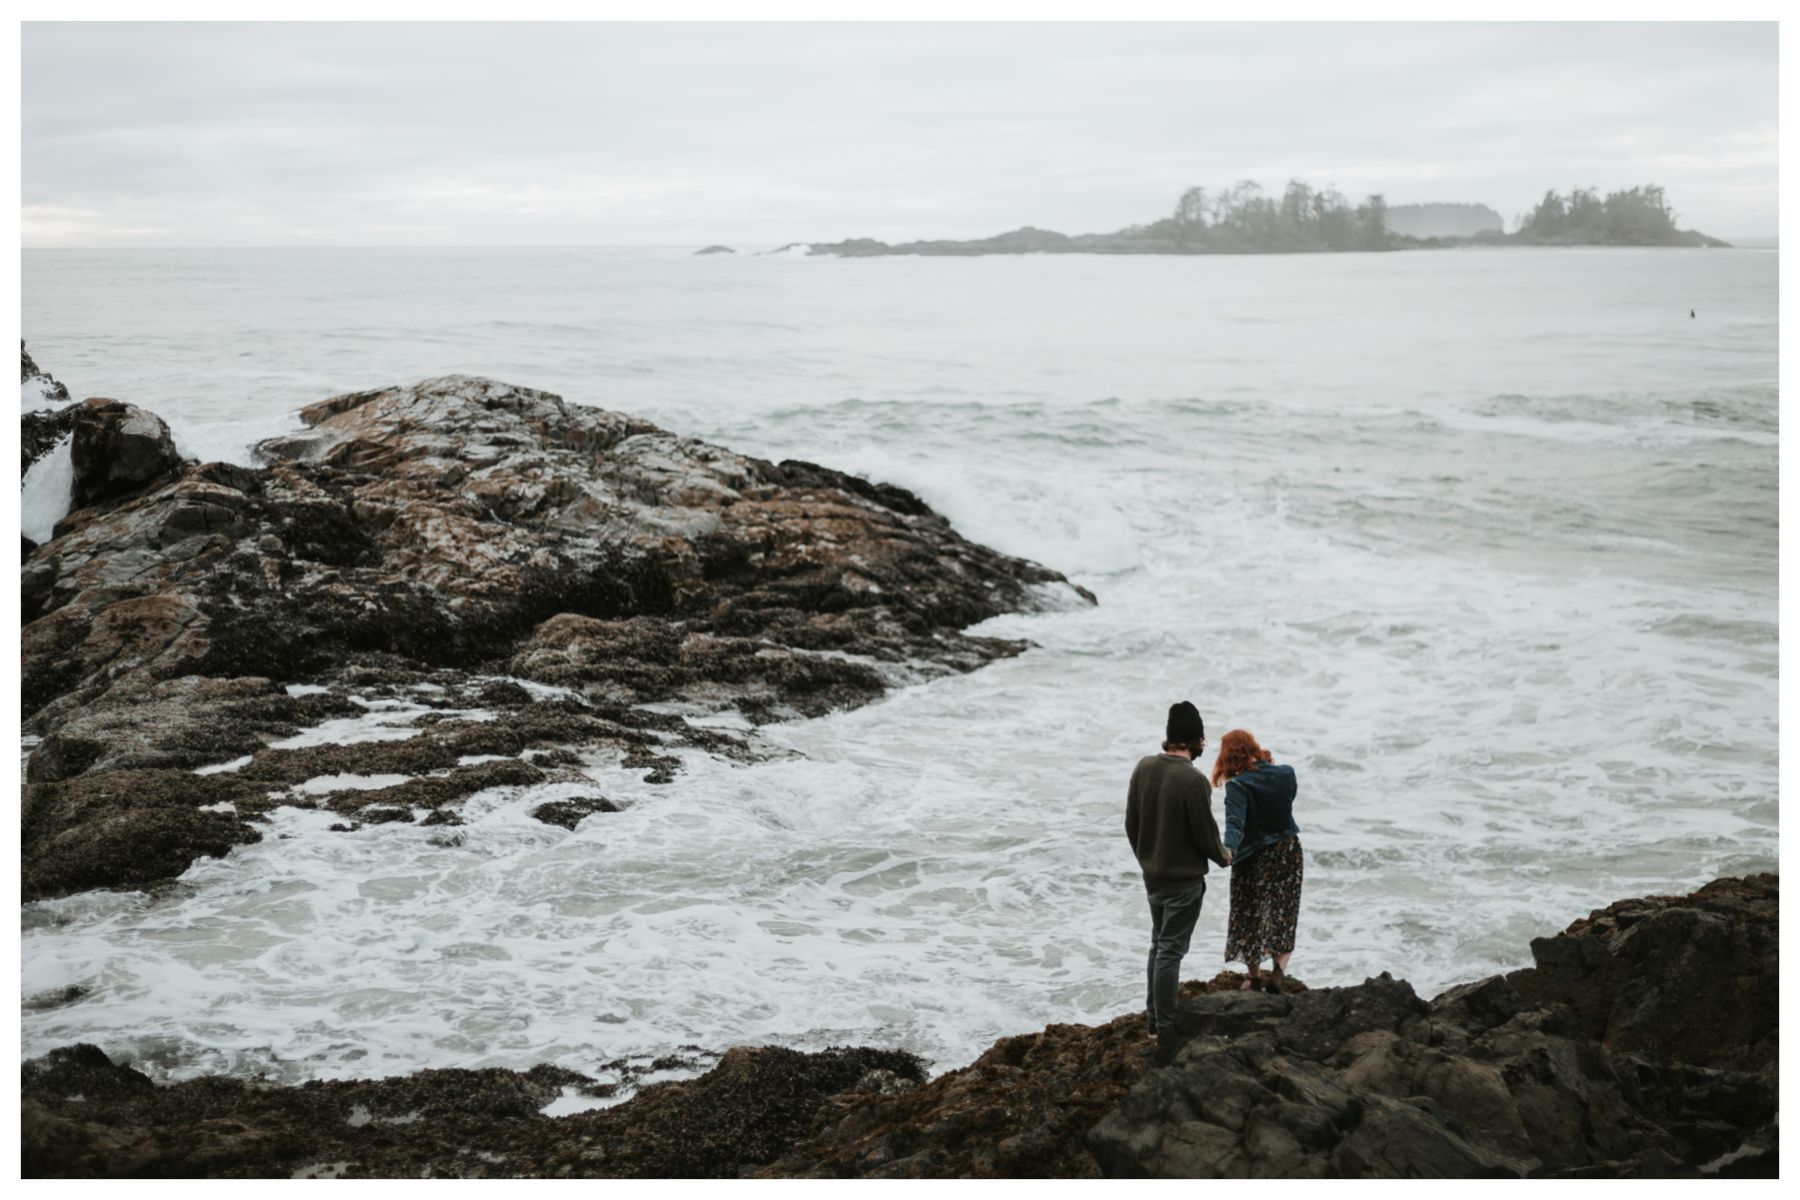 Tofino wedding photographer for a destination engagement photography session on Vancouver Island, BC